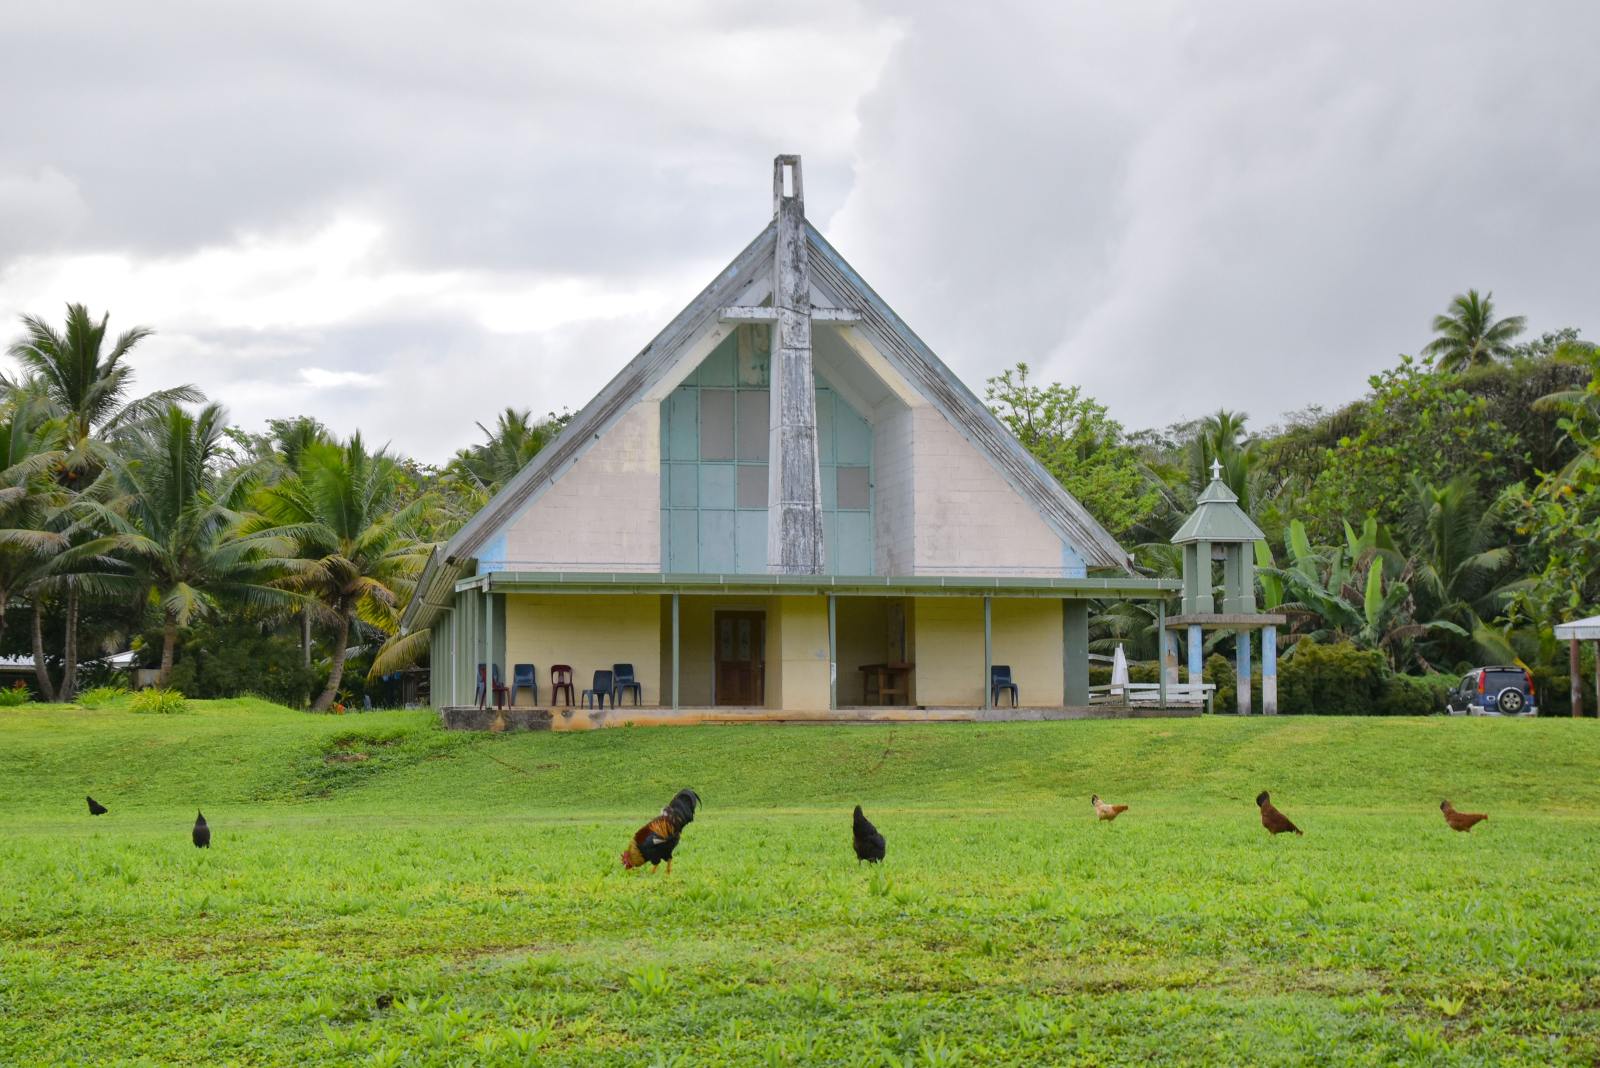 10 Things to Do in Niue on a Sunday